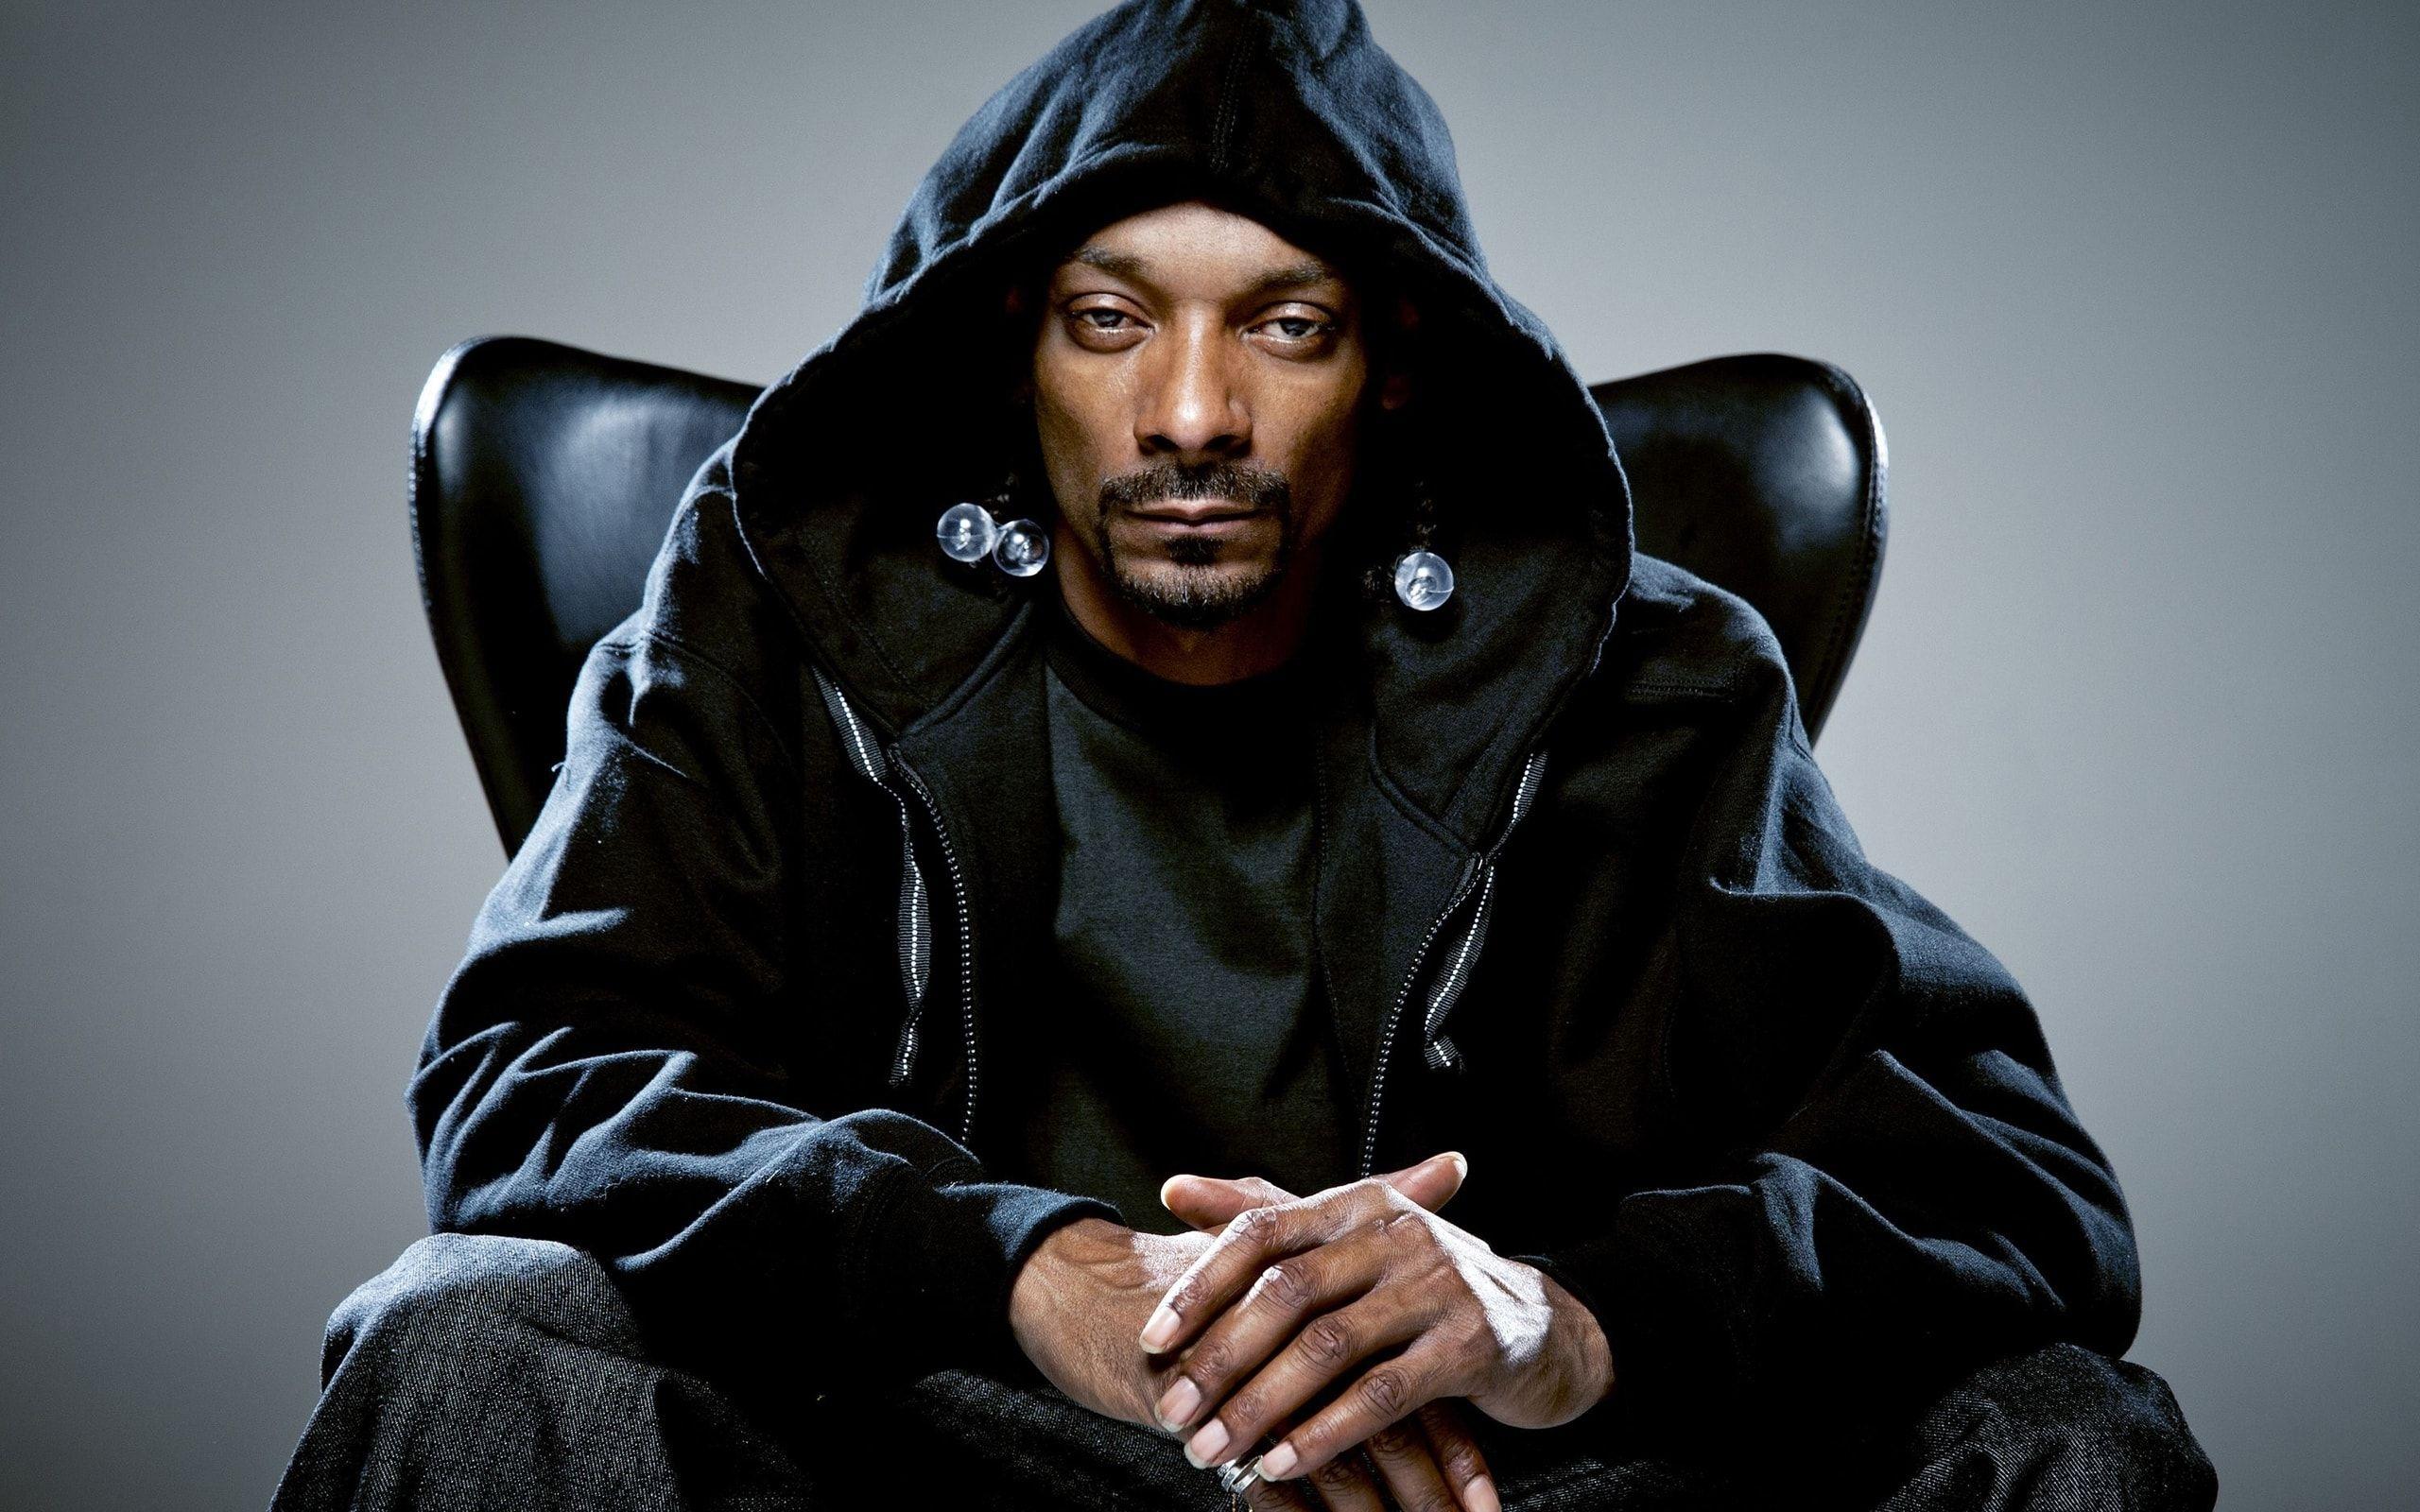 20 Snoop Dogg HD Wallpapers and Backgrounds